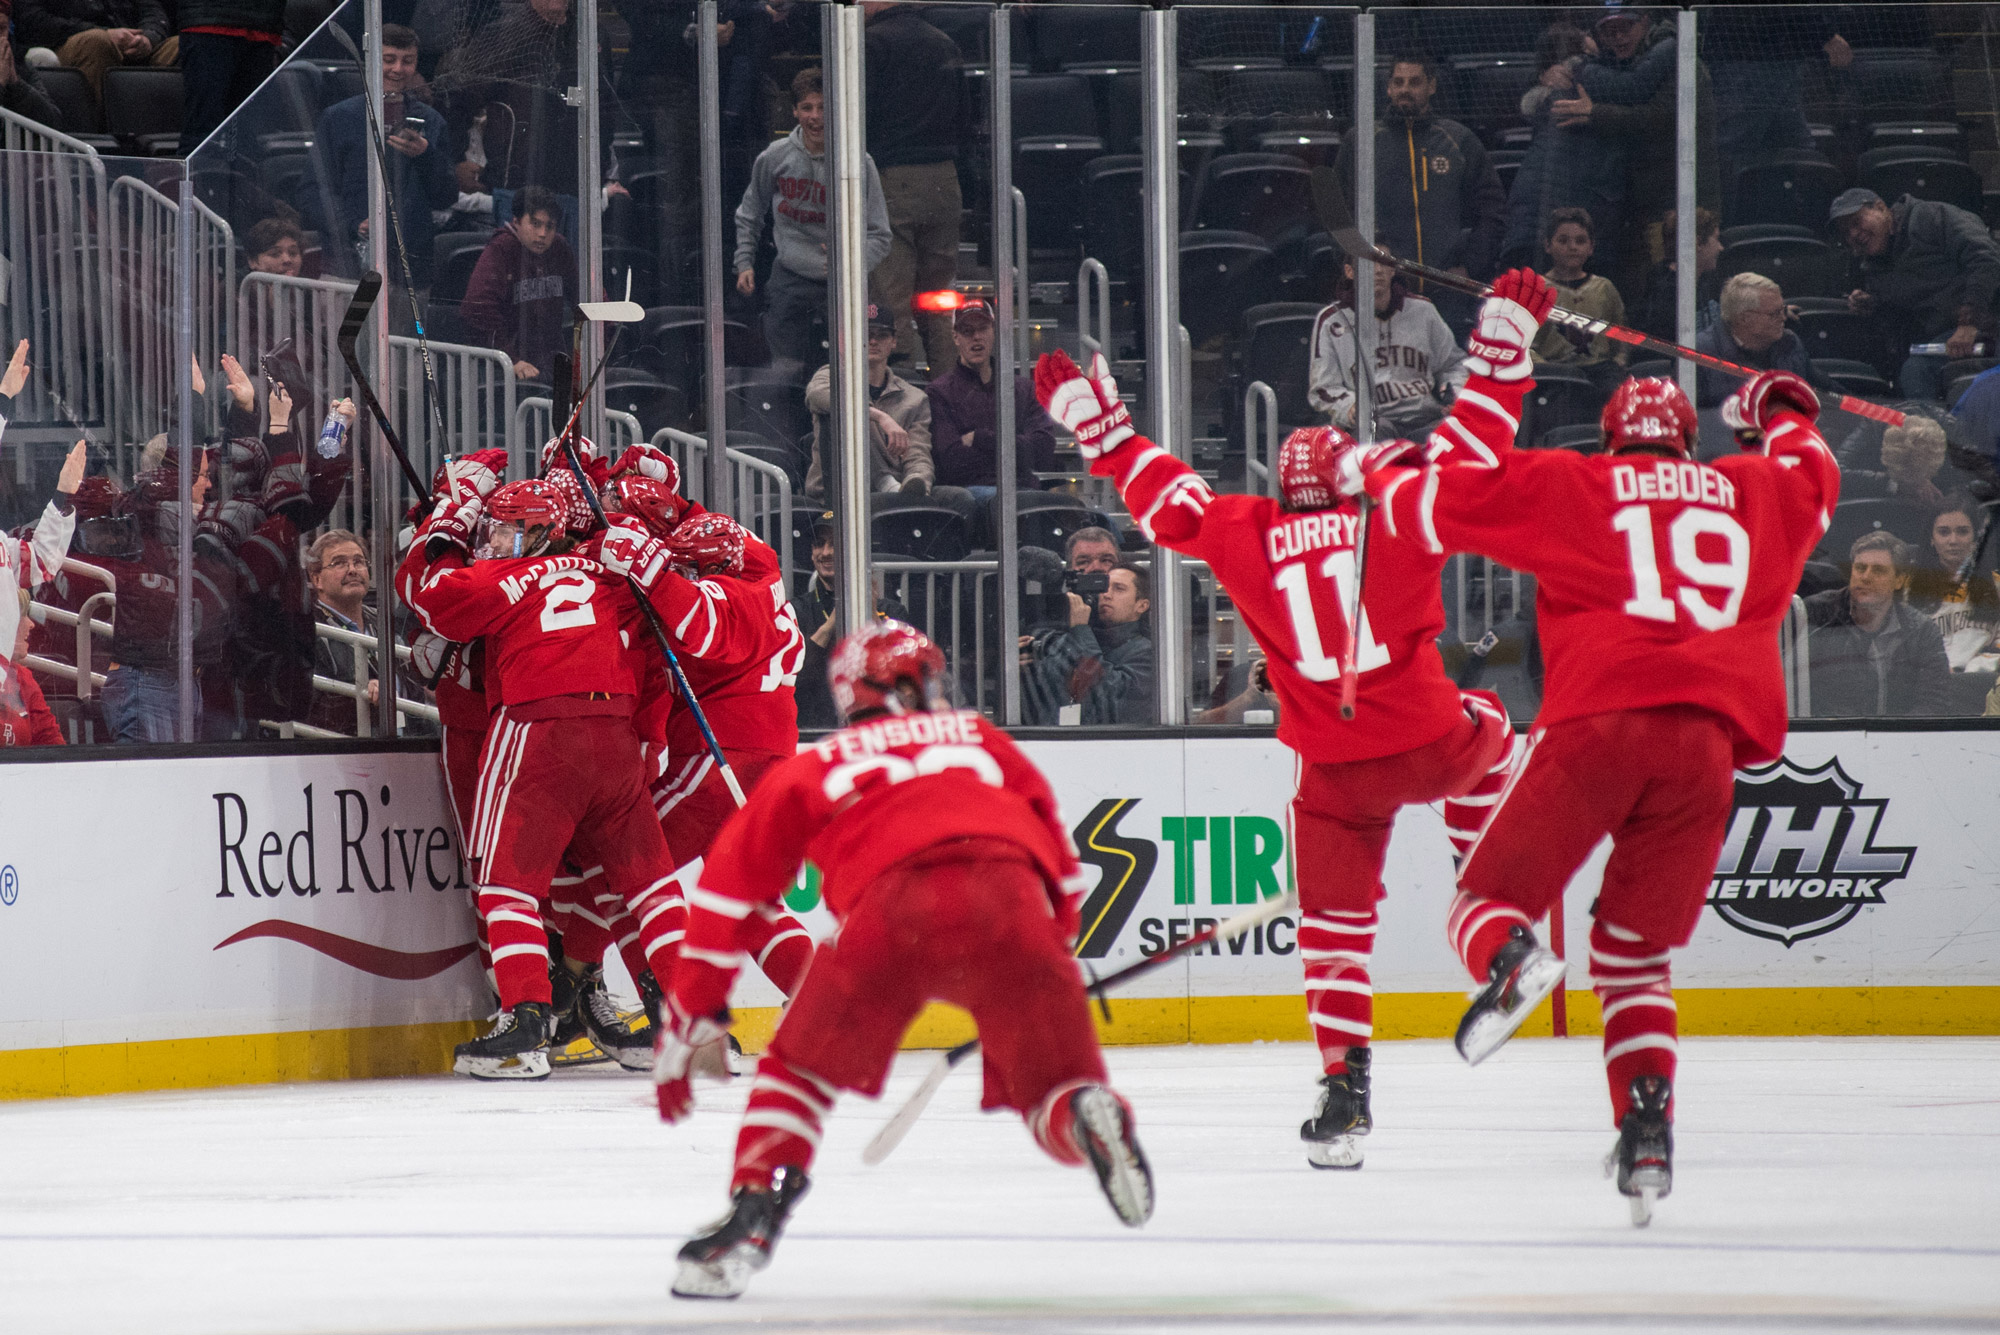 The BU men's hockey team celebrates after their Beanpot semifinal victory.